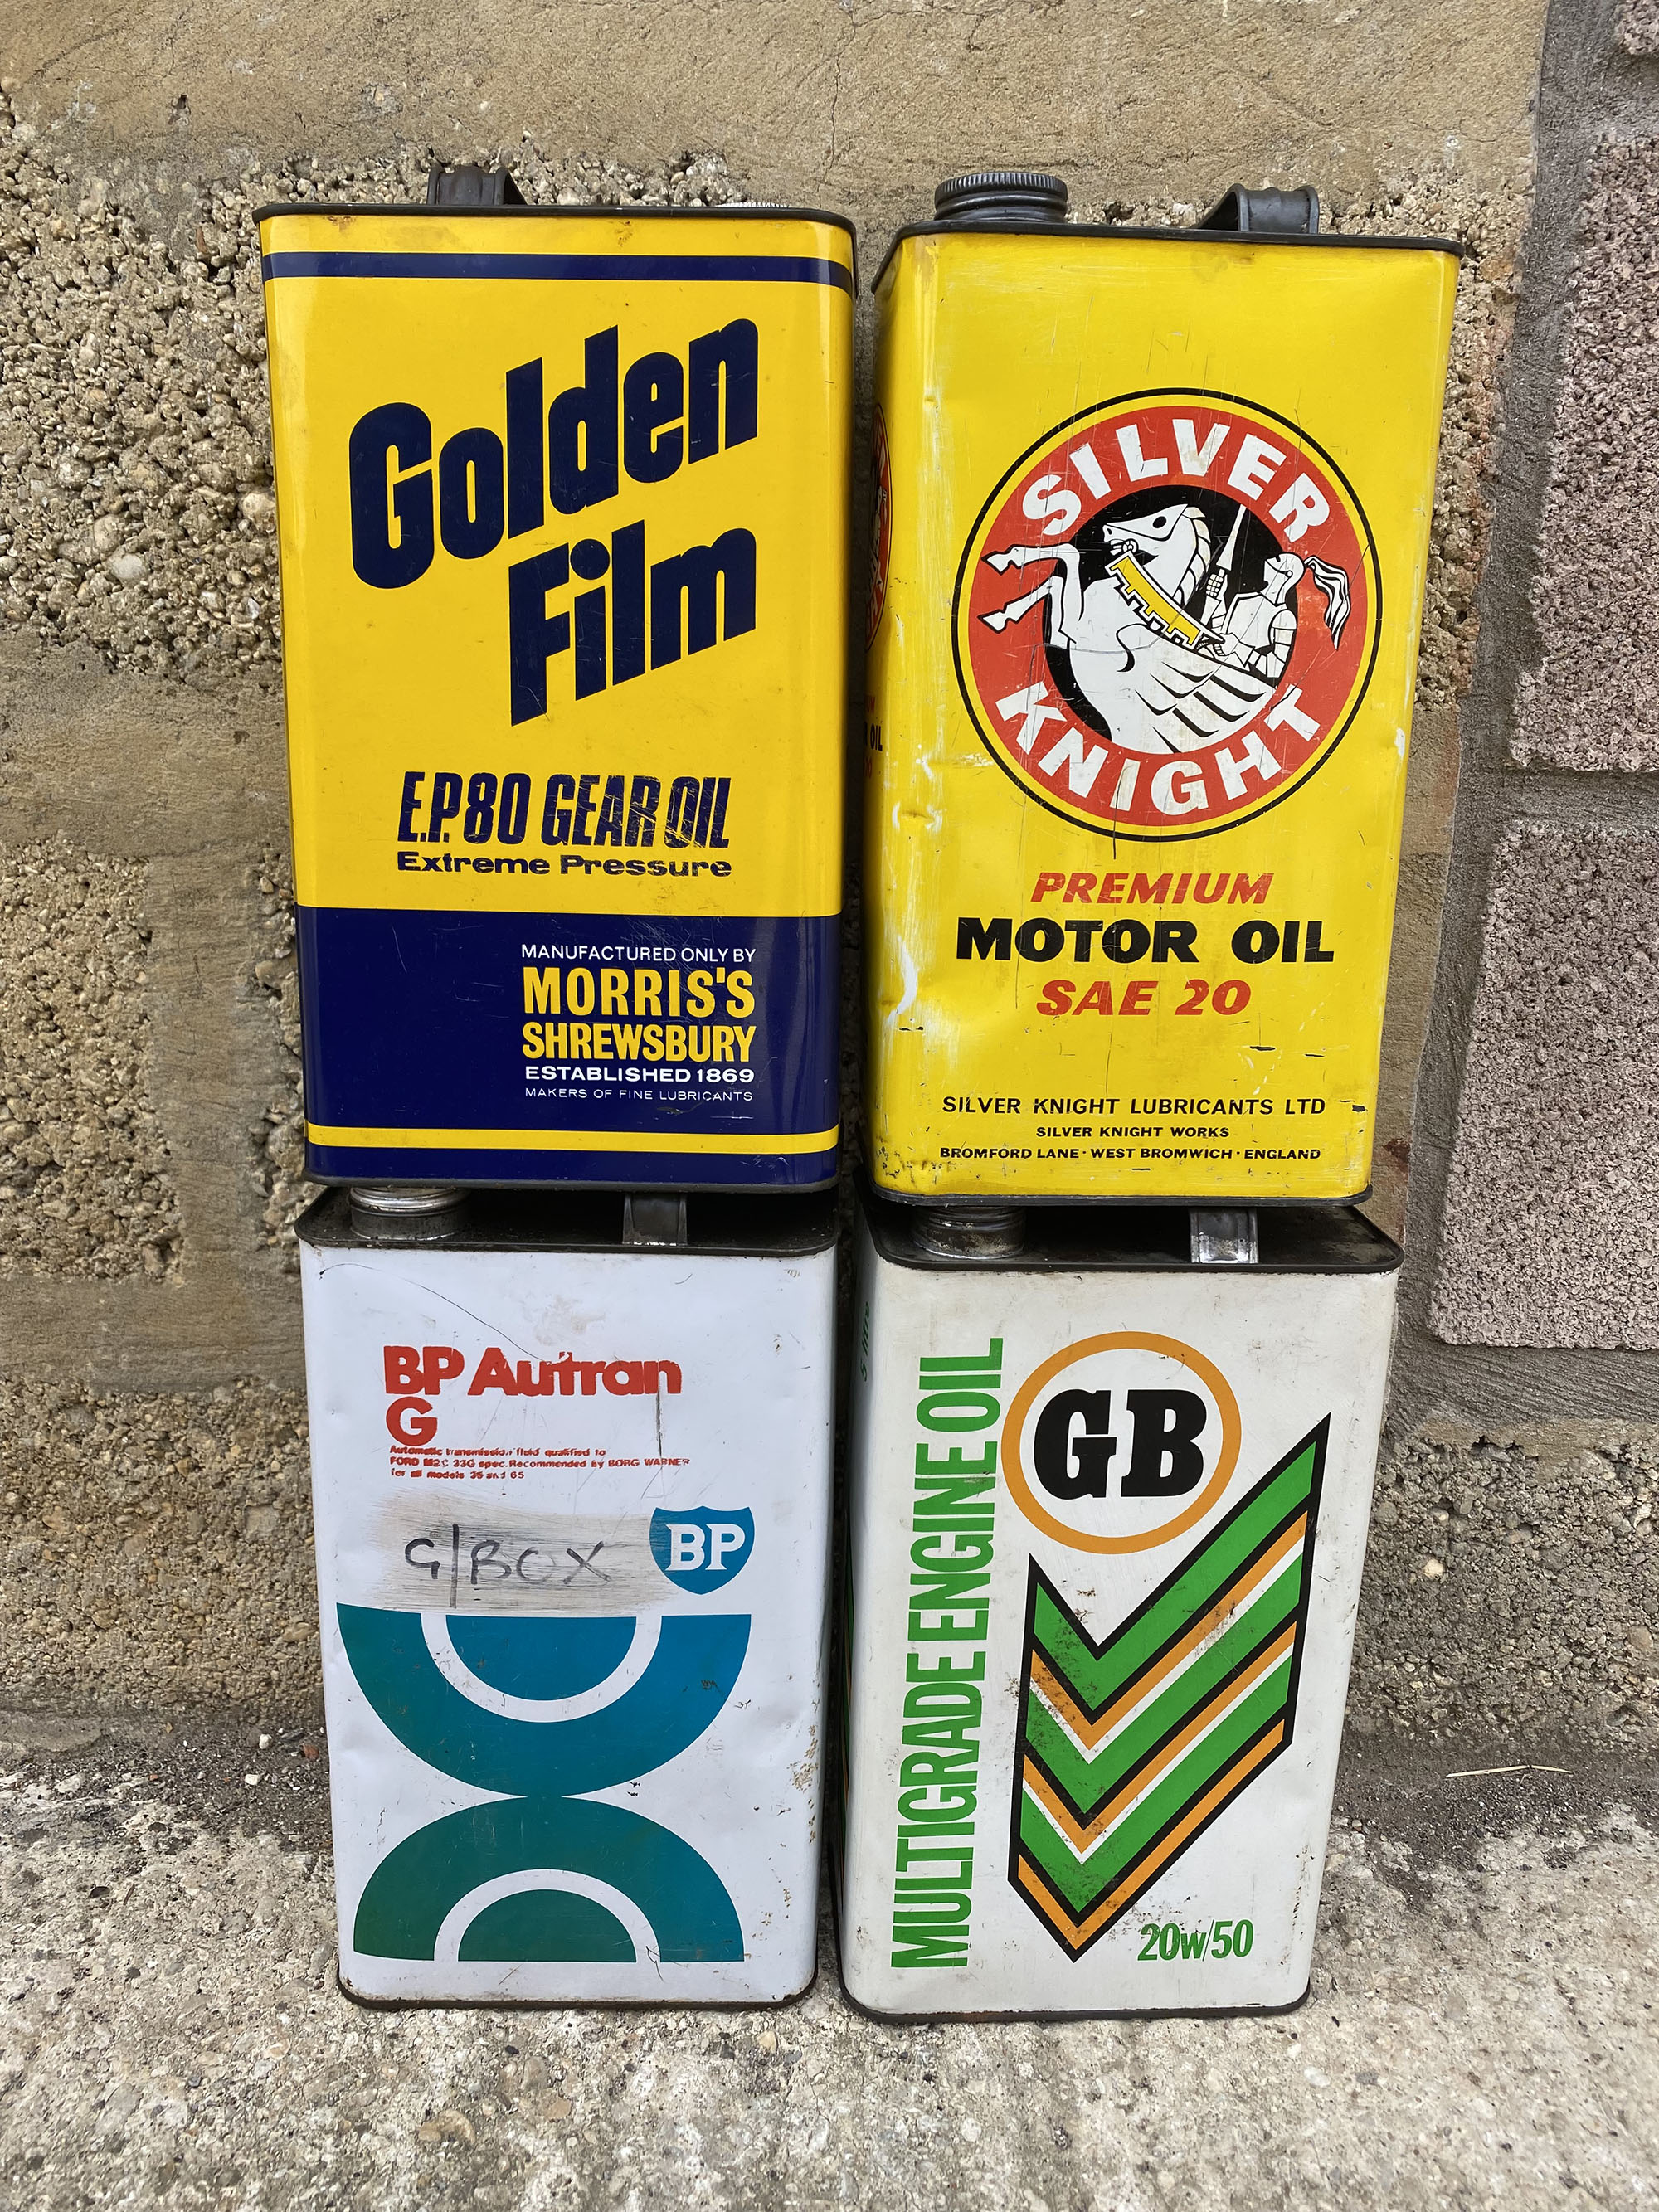 Four gallon cans including Morris's Shrewsbury Golden Film and Silver Knight.